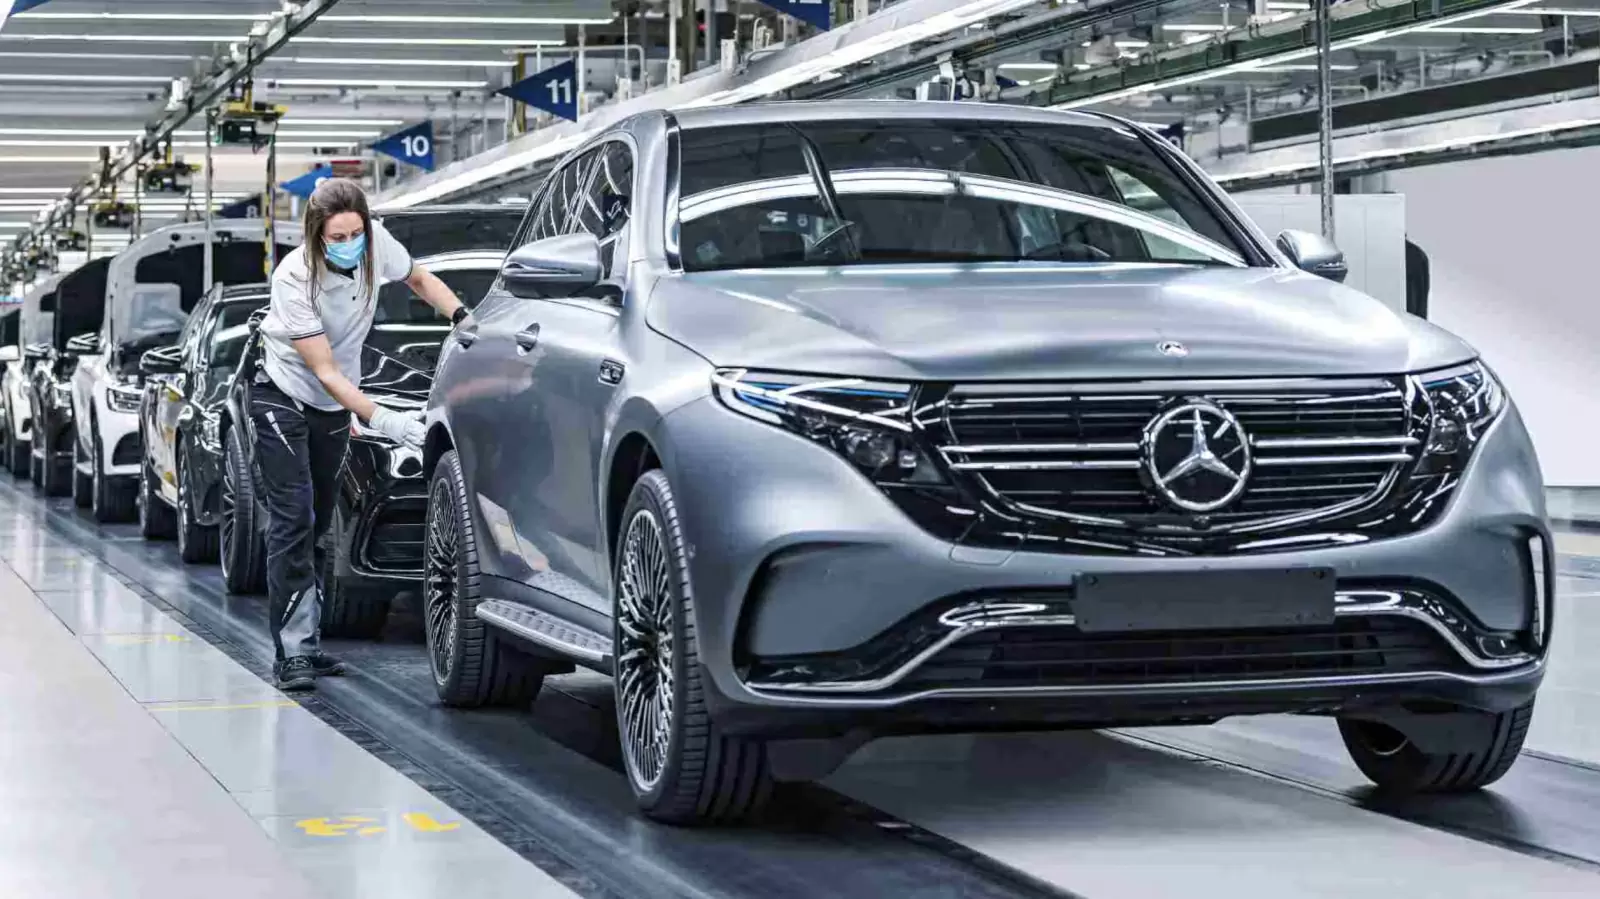 Mercedes has made a mega plan for the Indian market, will enter 9 new vehicles including EV and Hybrid